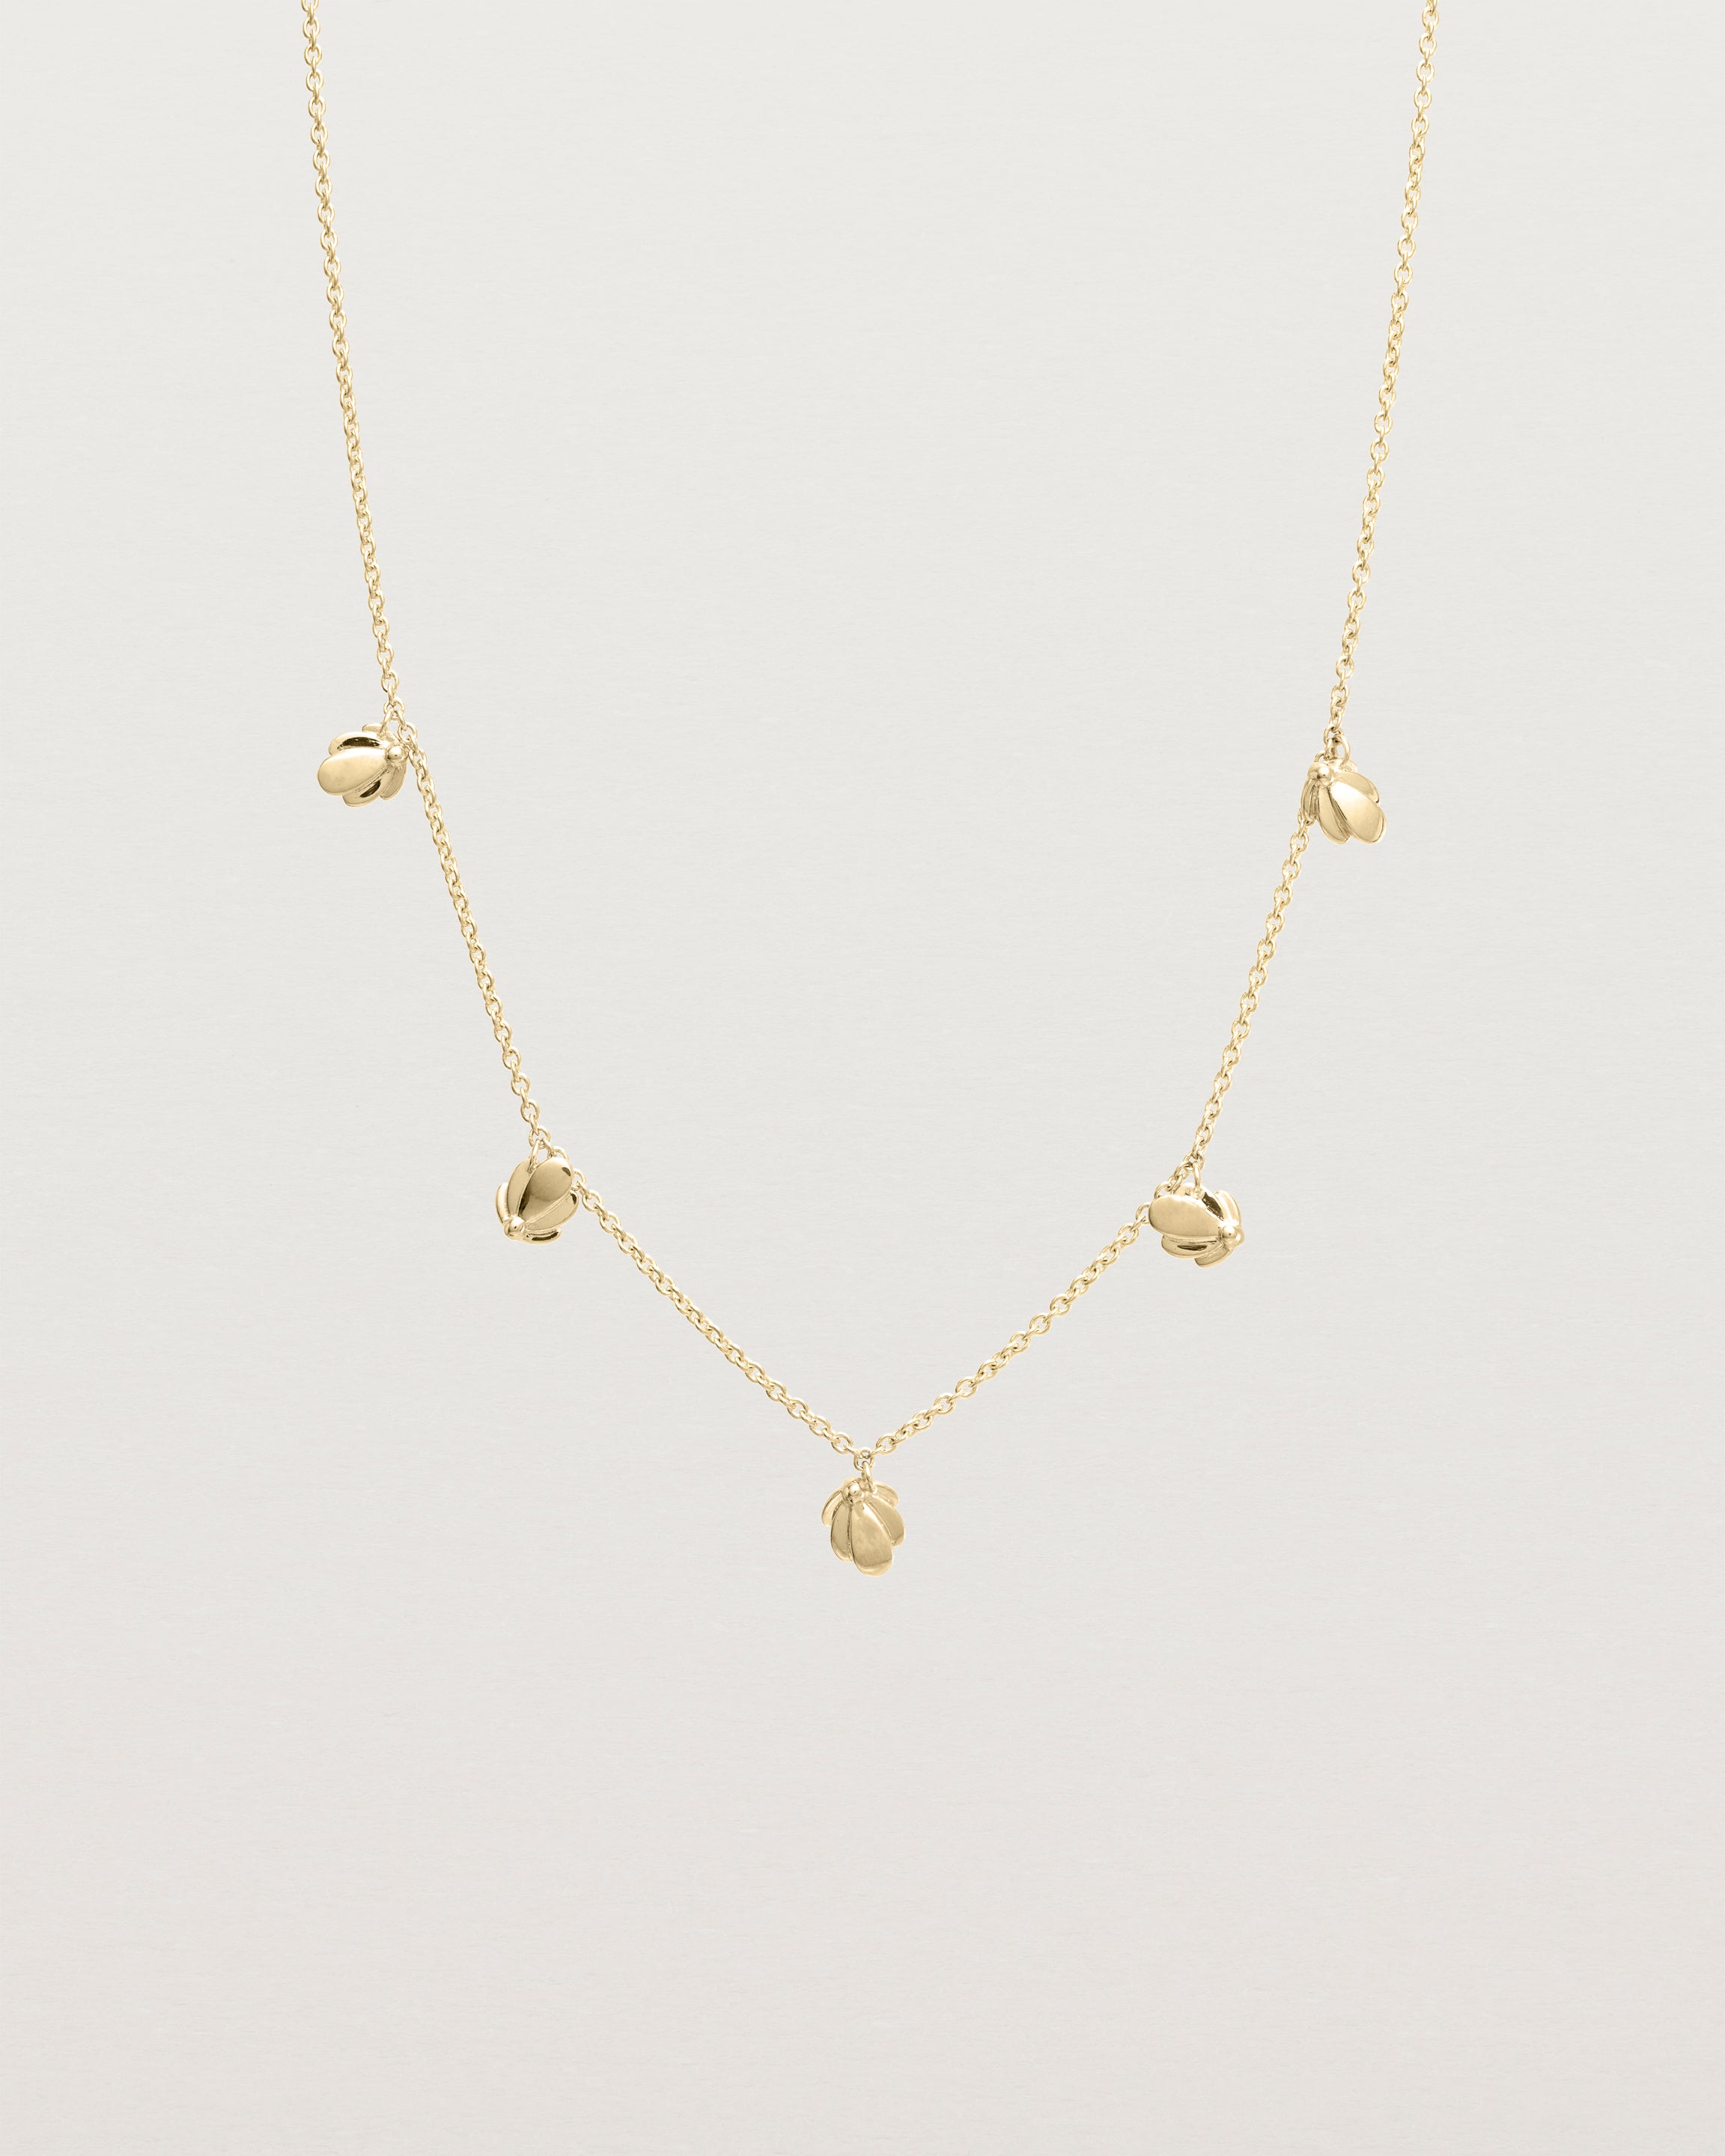 Front view of the Aeris Charm Necklace in yellow gold.